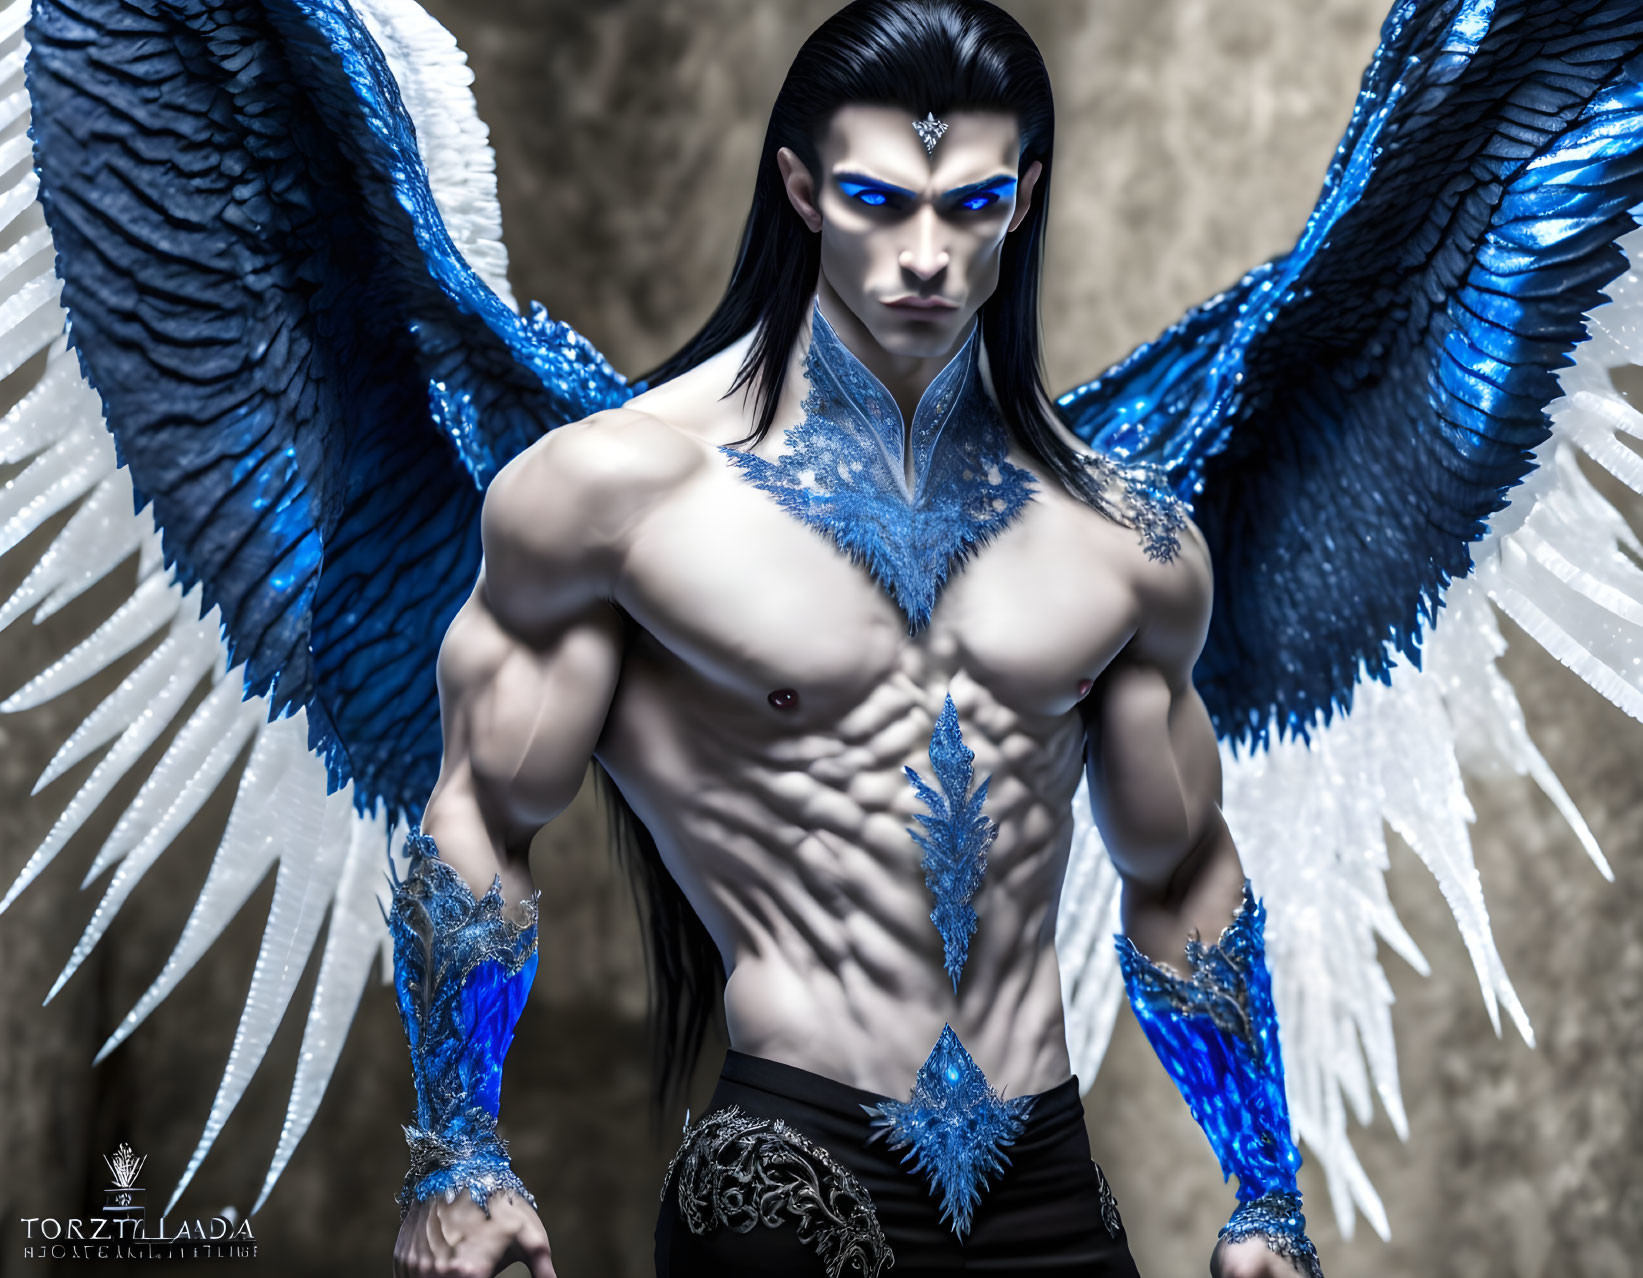 Blue-skinned muscular male figure with dramatic wings and intricate arm and waist embellishments.